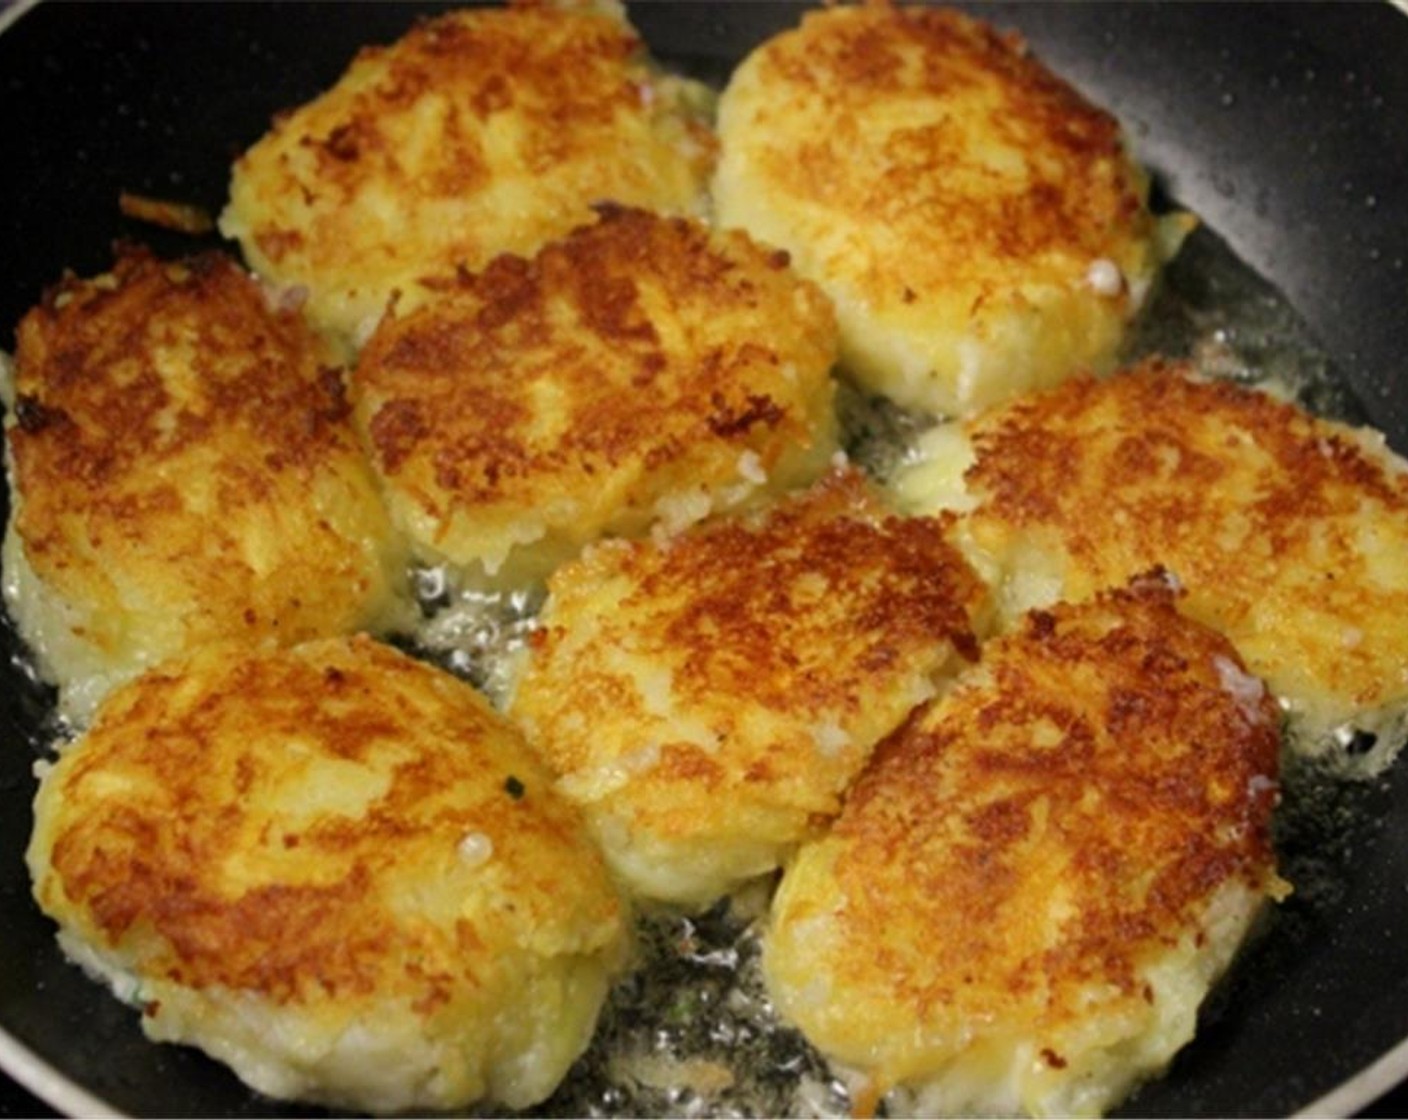 step 7 Cook the potato cakes on medium heat, about 5-7 minutes per side, until golden brown.